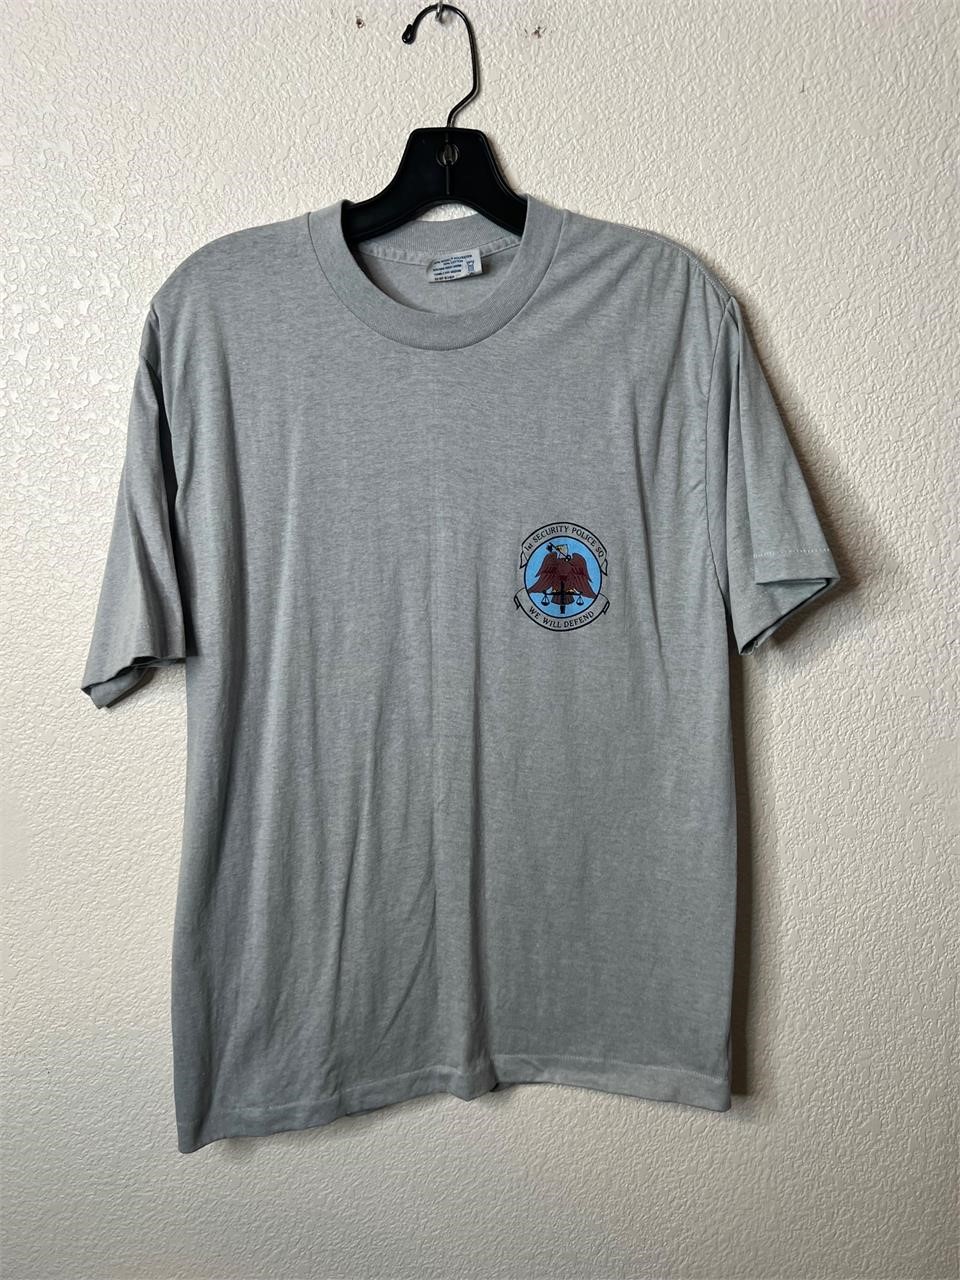 Vintage 1st Security Police Squadron Shirt